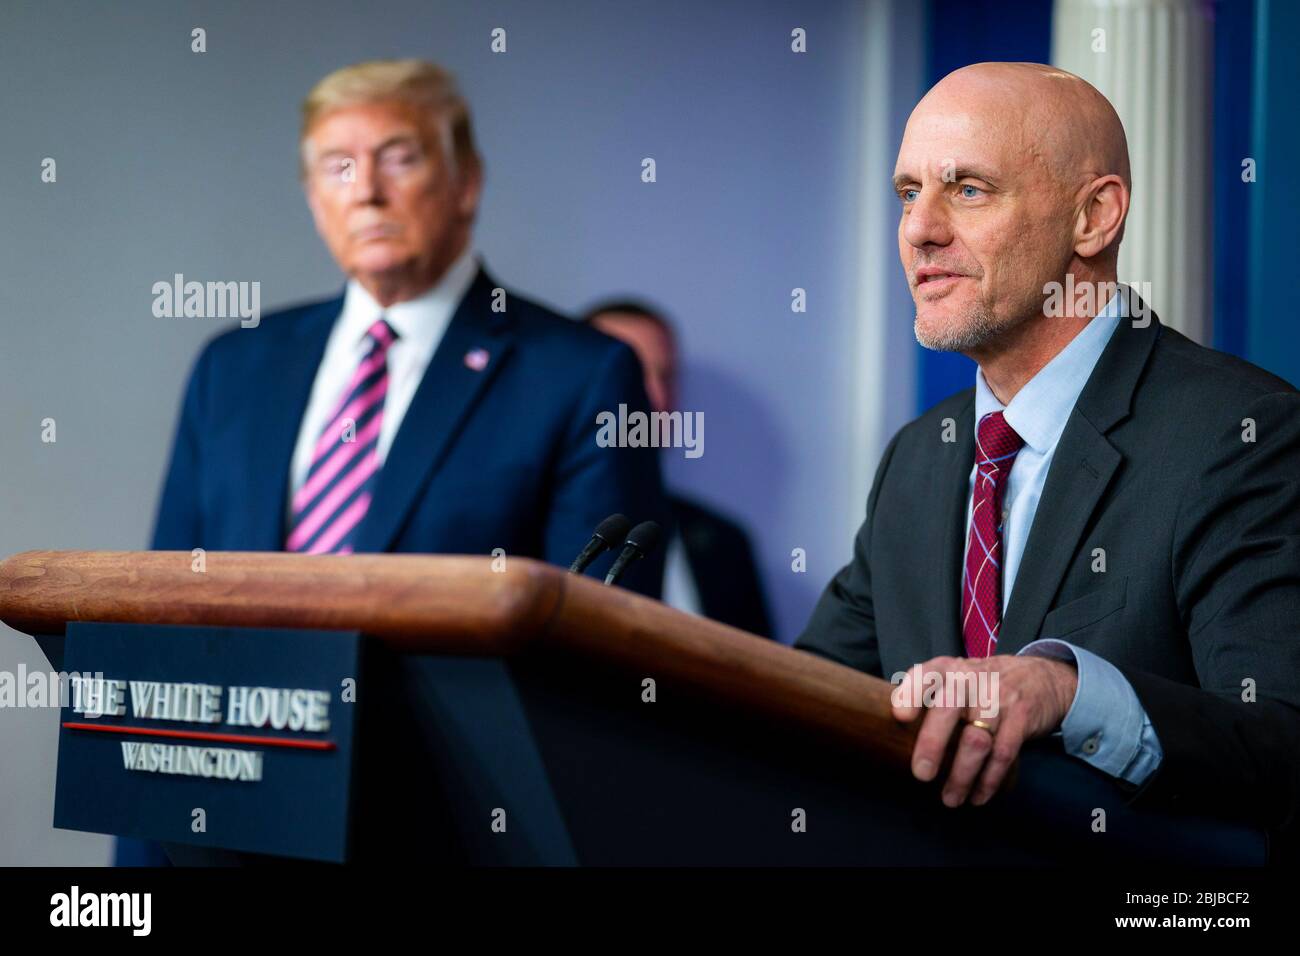 WASHINGTON DC, USA - 24 April 2020 - President Donald J. Trump listens as Dr. Stephen Hahn, Commissioner of the Food and Drug Administration, and a me Stock Photo